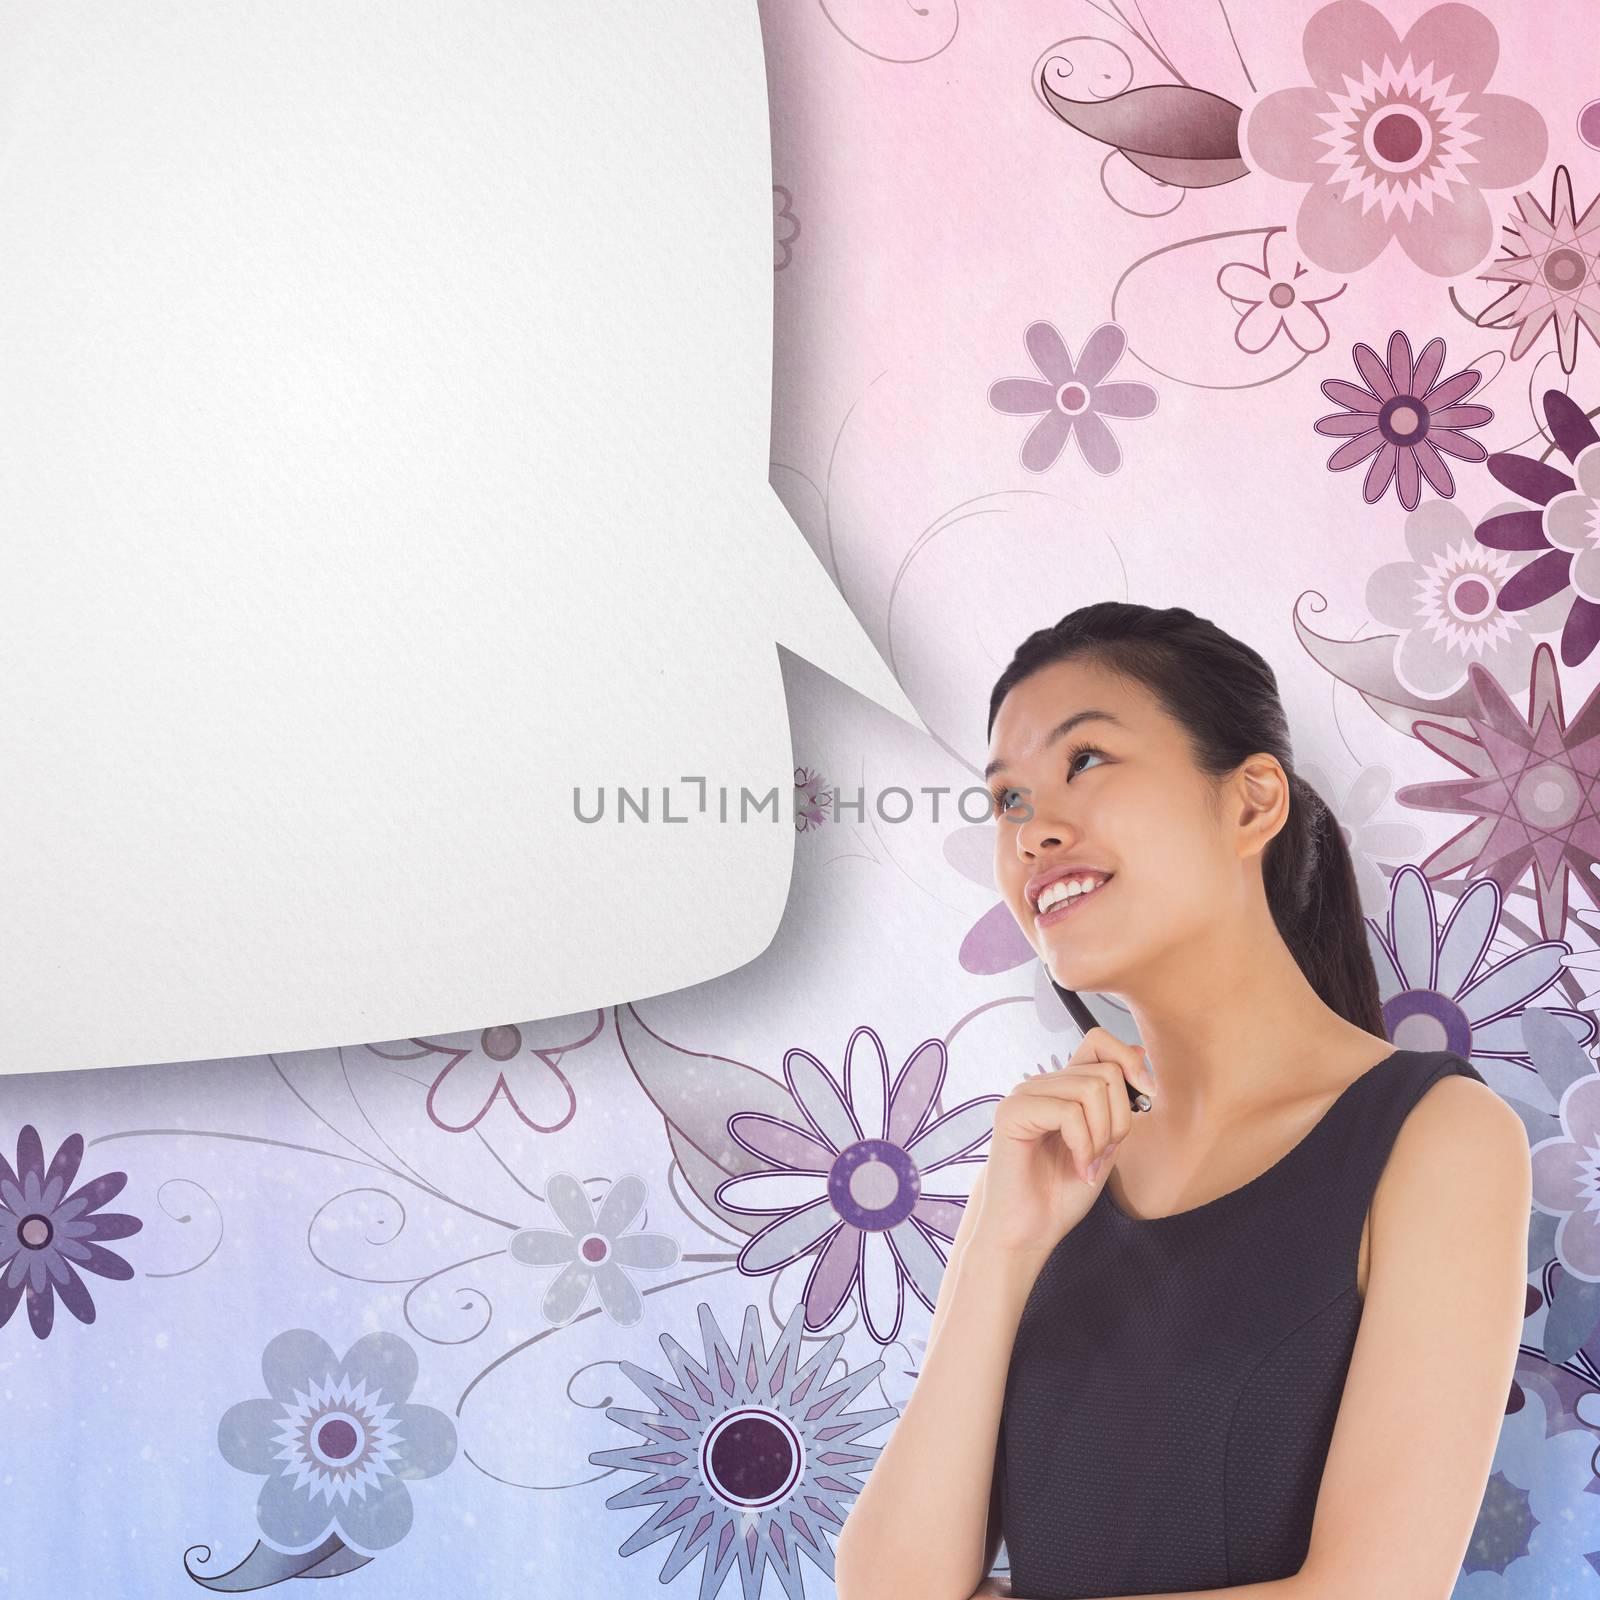 Composite image of thinking businesswoman with speech bubble by Wavebreakmedia